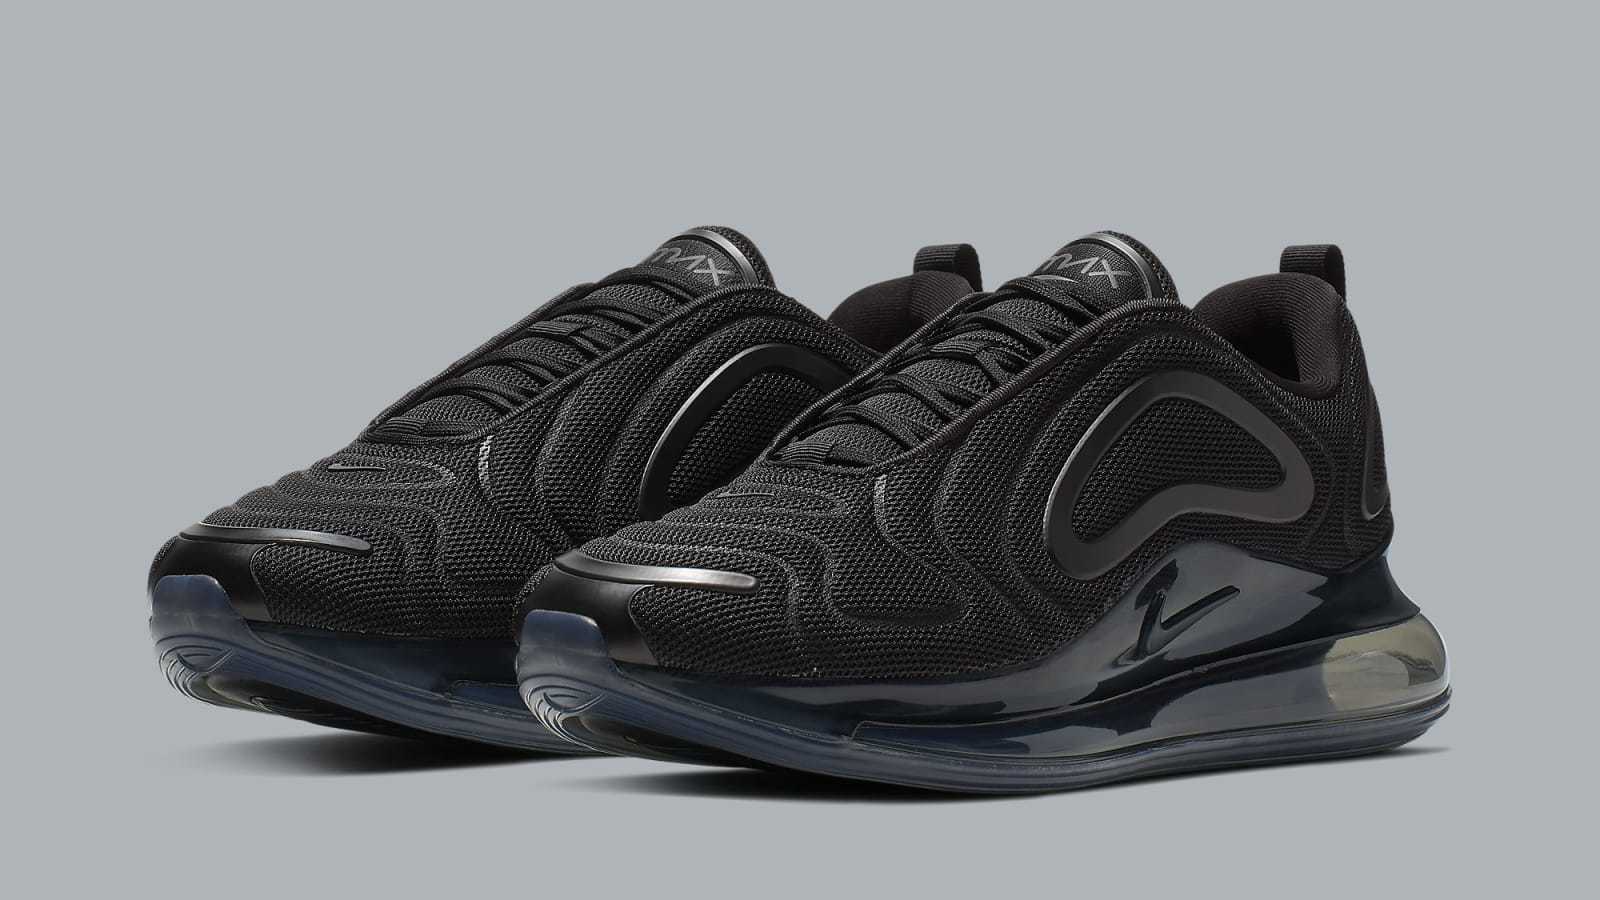 The Air Max 720 Gets Stealthy in Triple Black